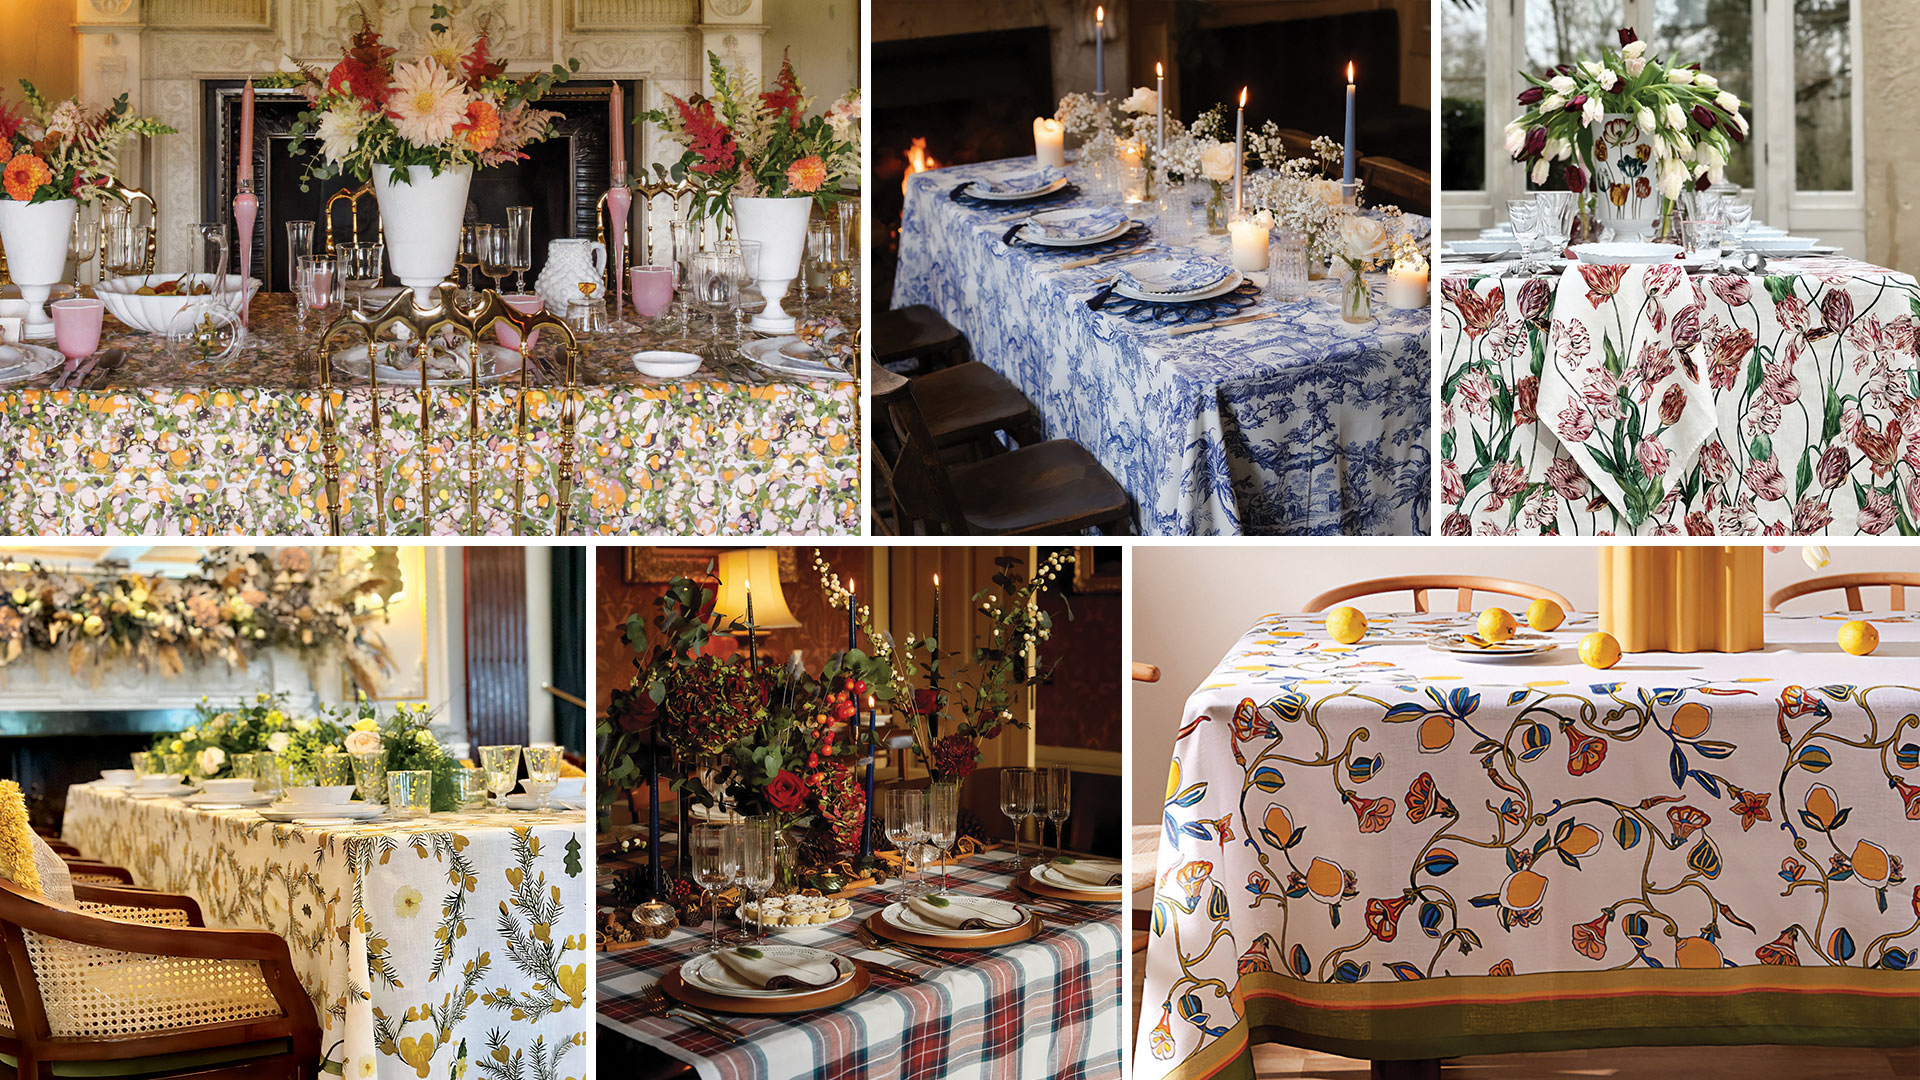 Fabric of Life: Dressing the table in crisp fine linen is the first step to refined dining